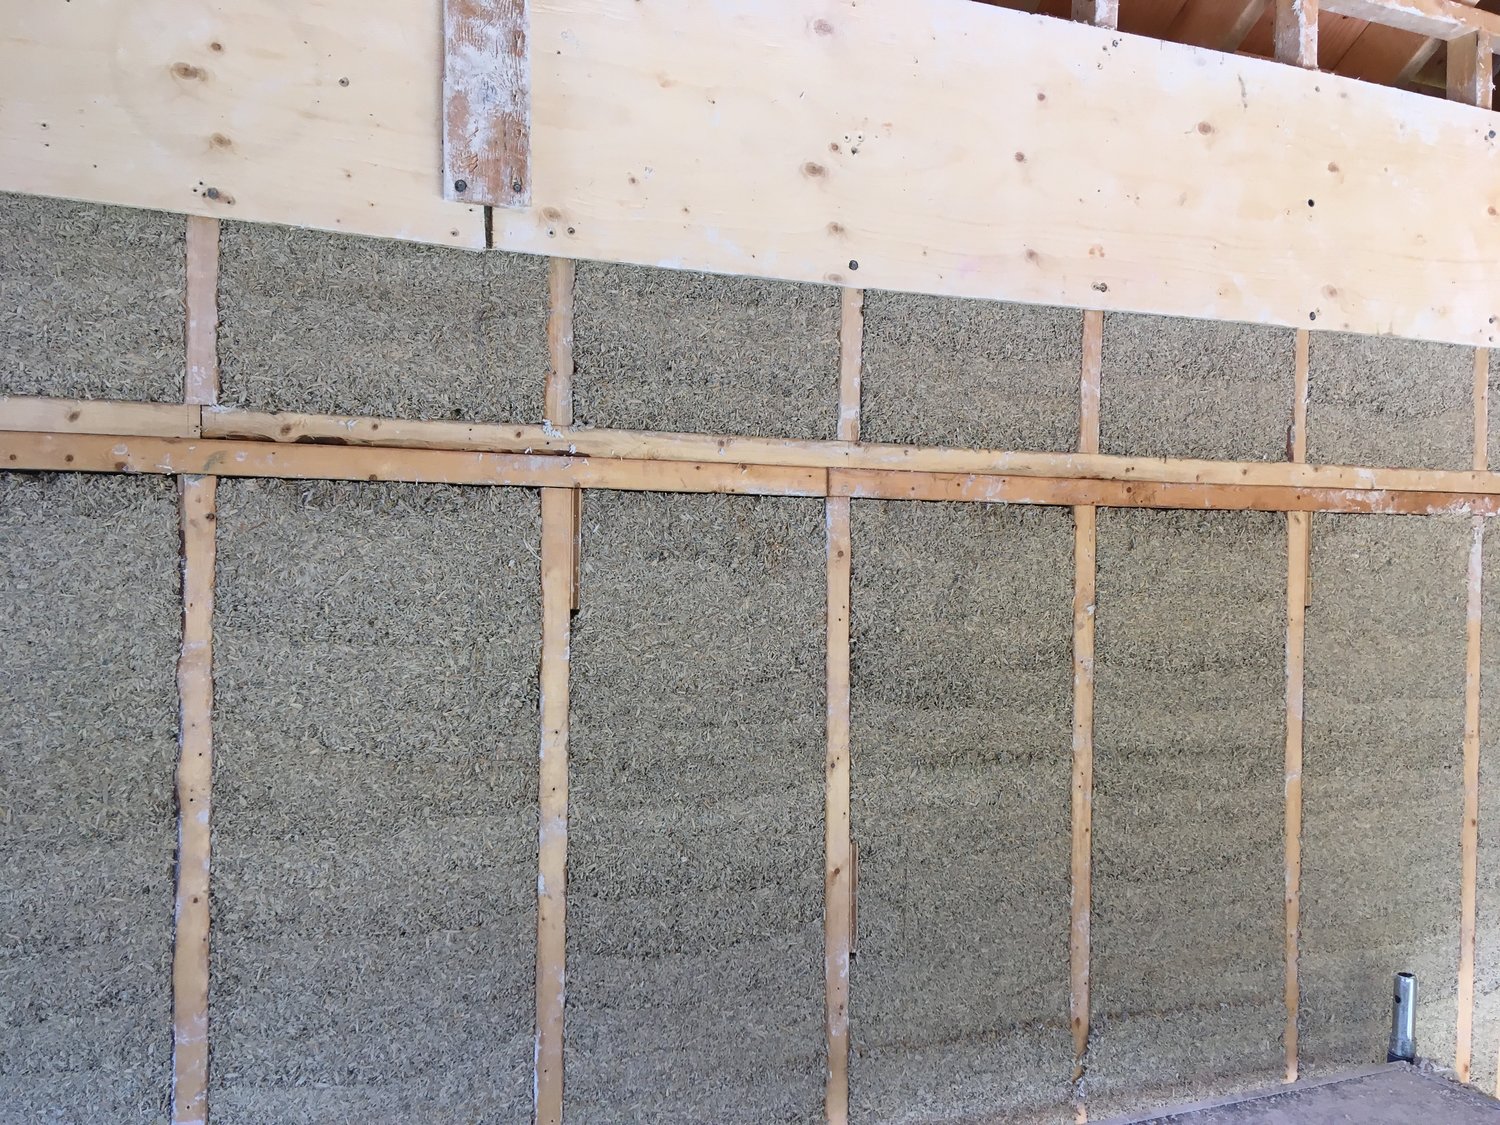 Cellulose insulation is a type of wood- or paper-based product. It is mechanically blown into or onto empty spaces in the structural part of a house to slow down the transmission of heat or cold. Because of the nature of the loose material,  it can fit in enclosed areas (such as walls, pictured here) and can conform around obstructions such as wires and ducts (found both in walls and in attics).